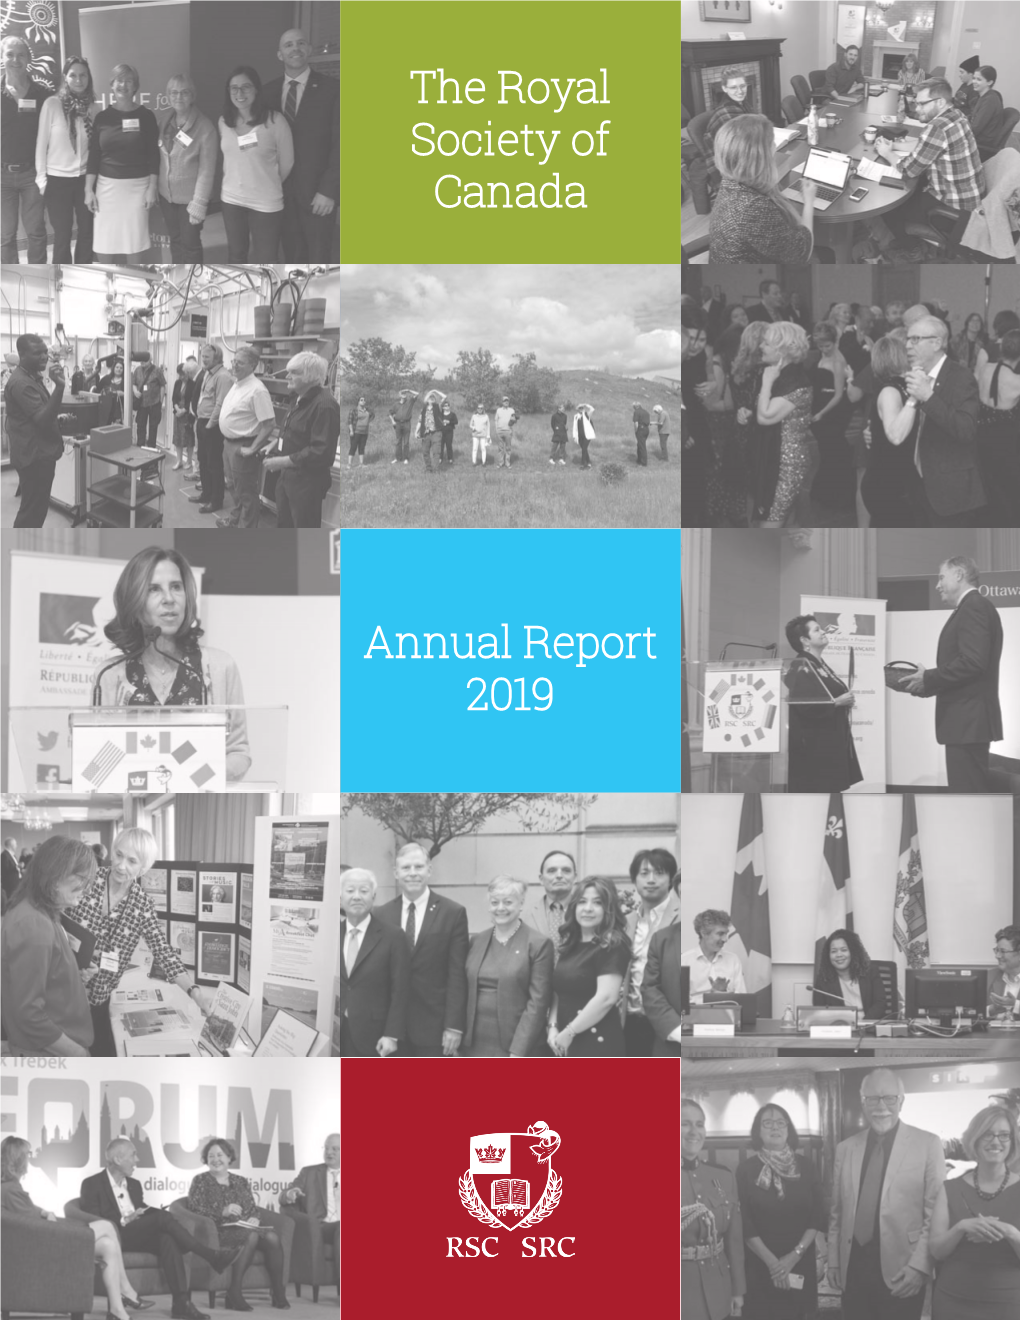 Annual Report 2019 the Royal Society of Canada